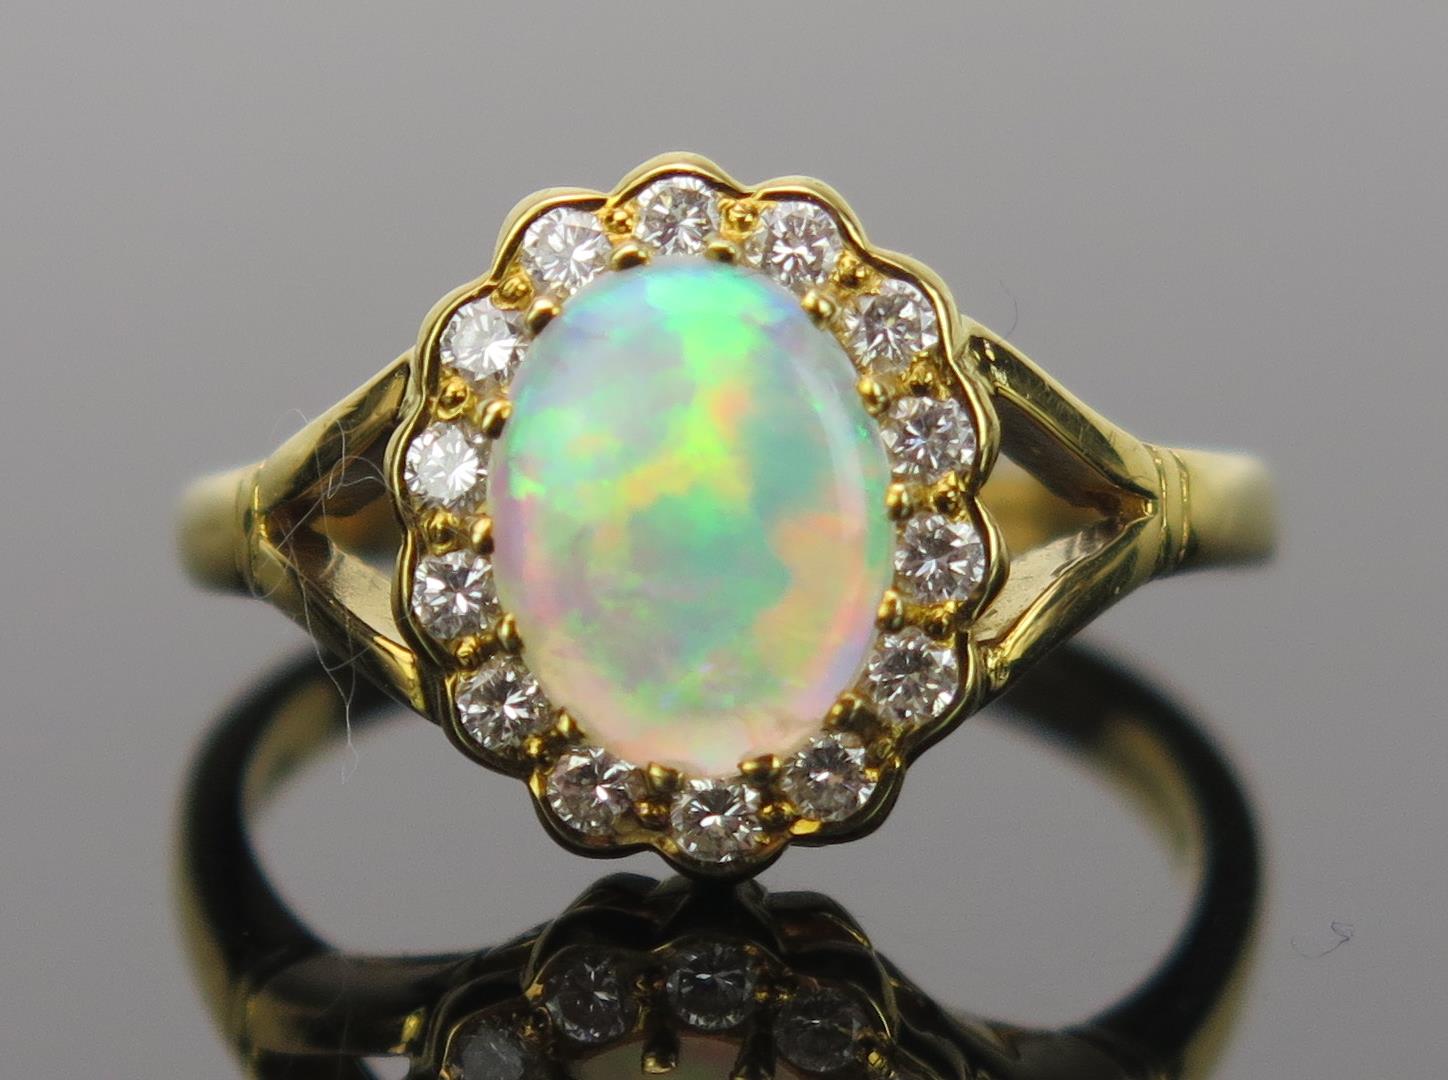 White Opal and Diamond Cluster Ring in an 18ct hallmarked gold setting, 9x7mm central stone, 13x11mm - Image 5 of 5